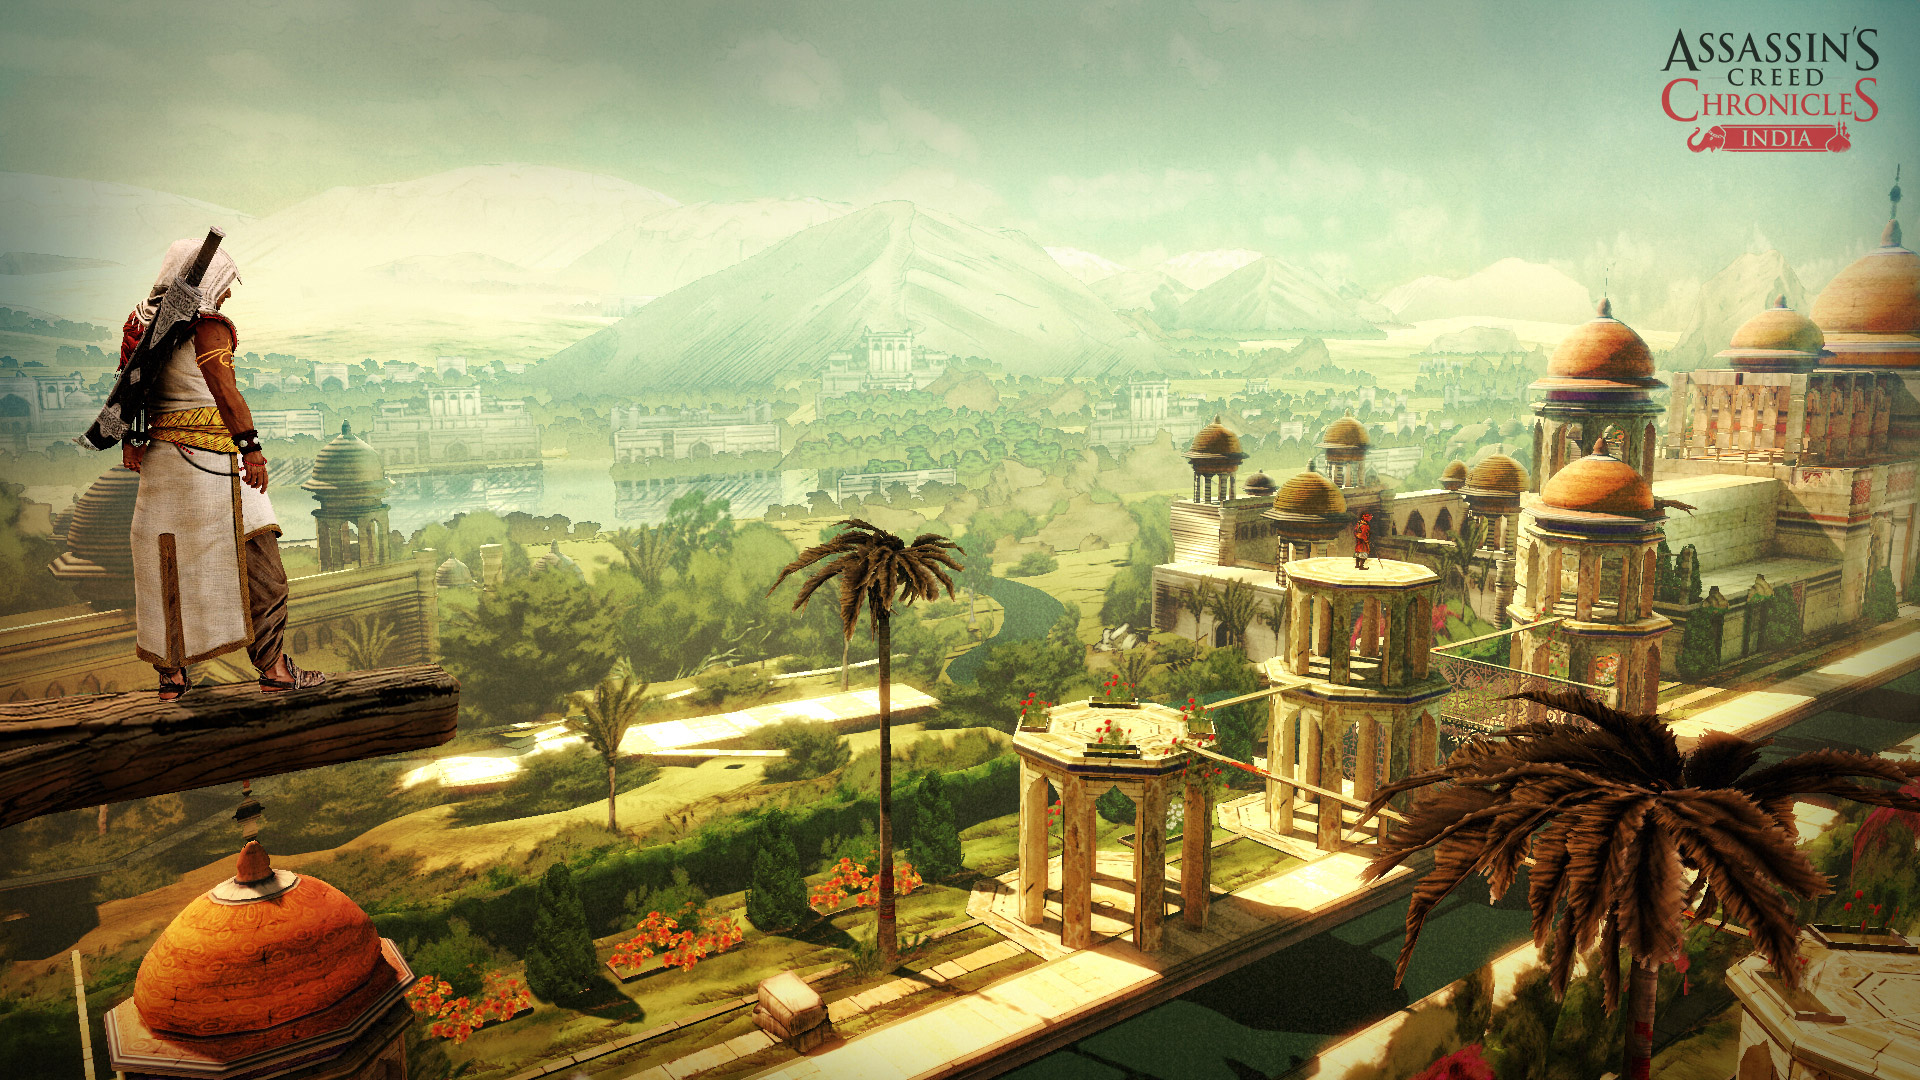 Assassin's Creed Chronicles India le nouveau spin-off de la licence Assassin's Creed